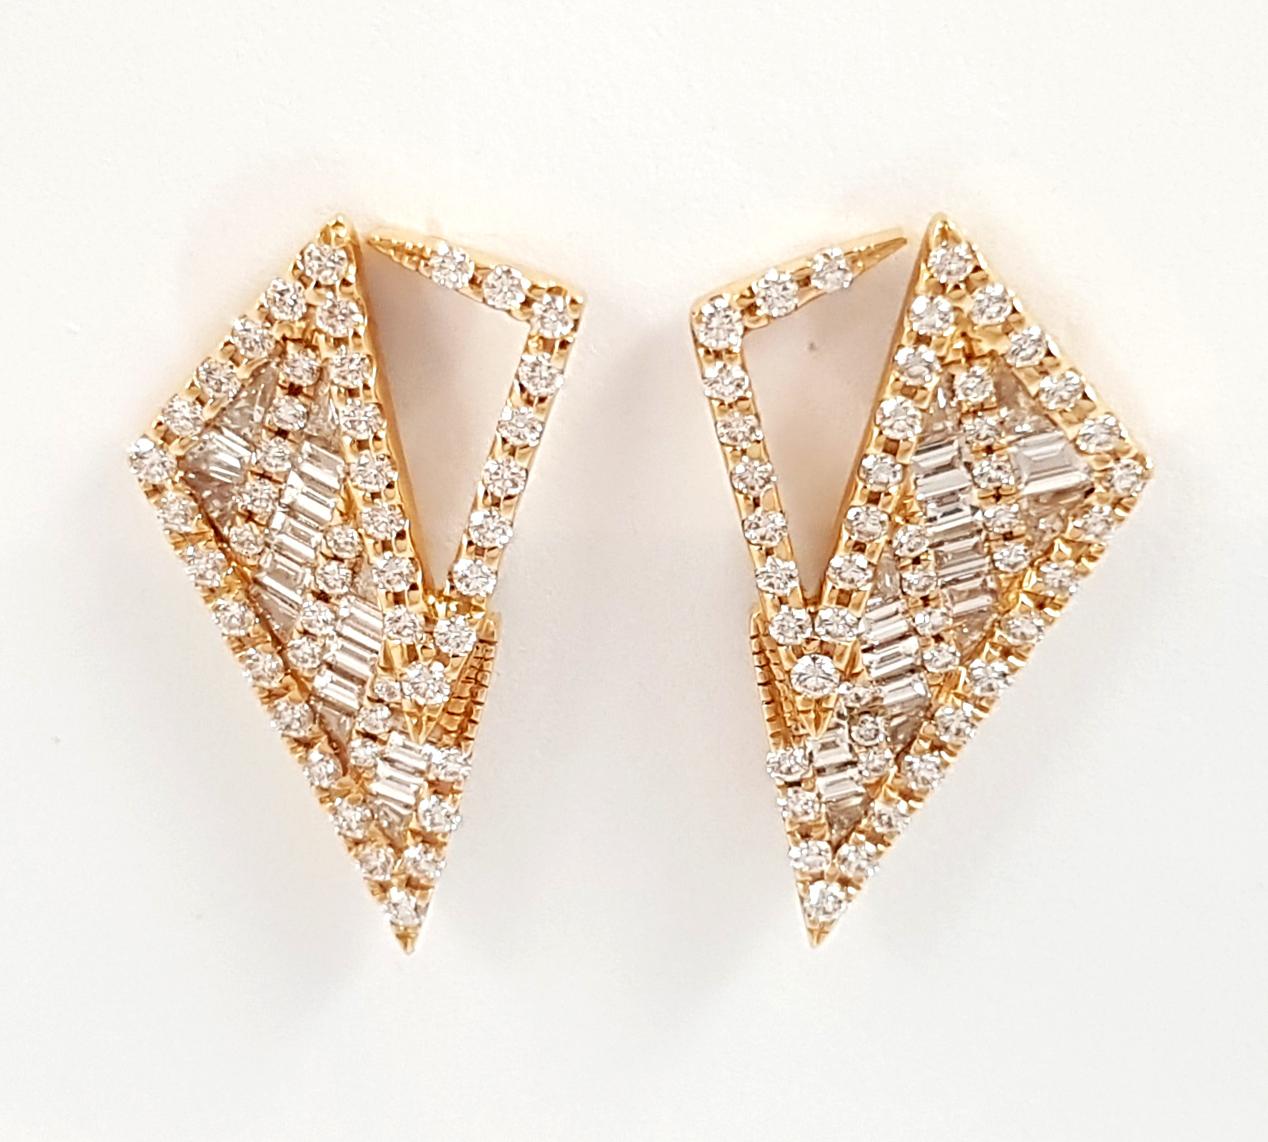 Diamond 2.21 carats Earrings set in 18K Rose Gold Settigs

Width: 1.5 cm
Length: 2.6 cm
Weight: 7.02 grams

The ancient Japanese tradition of paper folding has inspired the form and elements of this modern collection. With a series of folds and